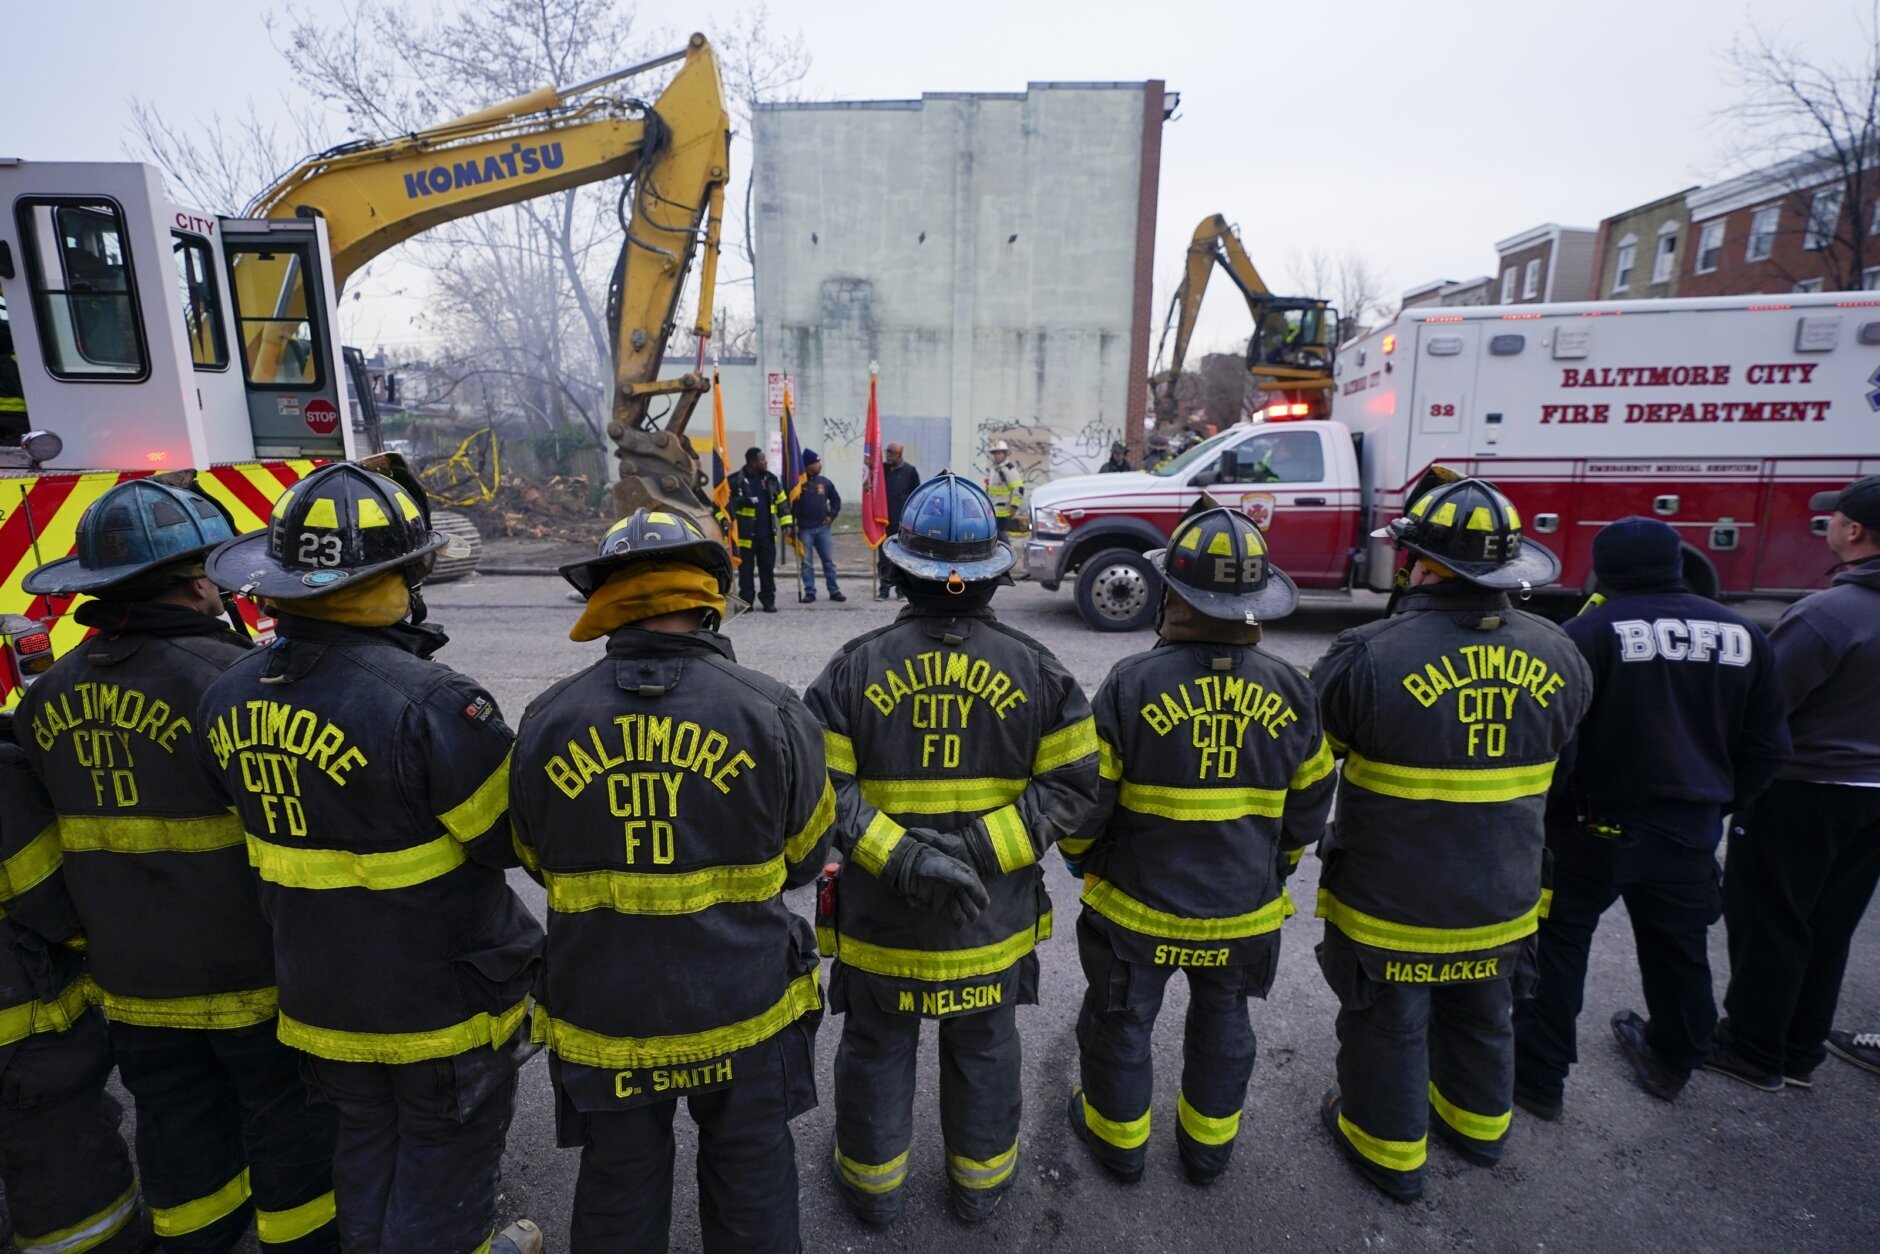 Firefighters stand in a line near an ambulance after a firefighter who died while battling a two-alarm fire in a vacant row home was pulled from the collapsed building, Monday, Jan. 24, 2022, in Baltimore. Officials said several firefighters died during the blaze. (AP Photo/Julio Cortez)